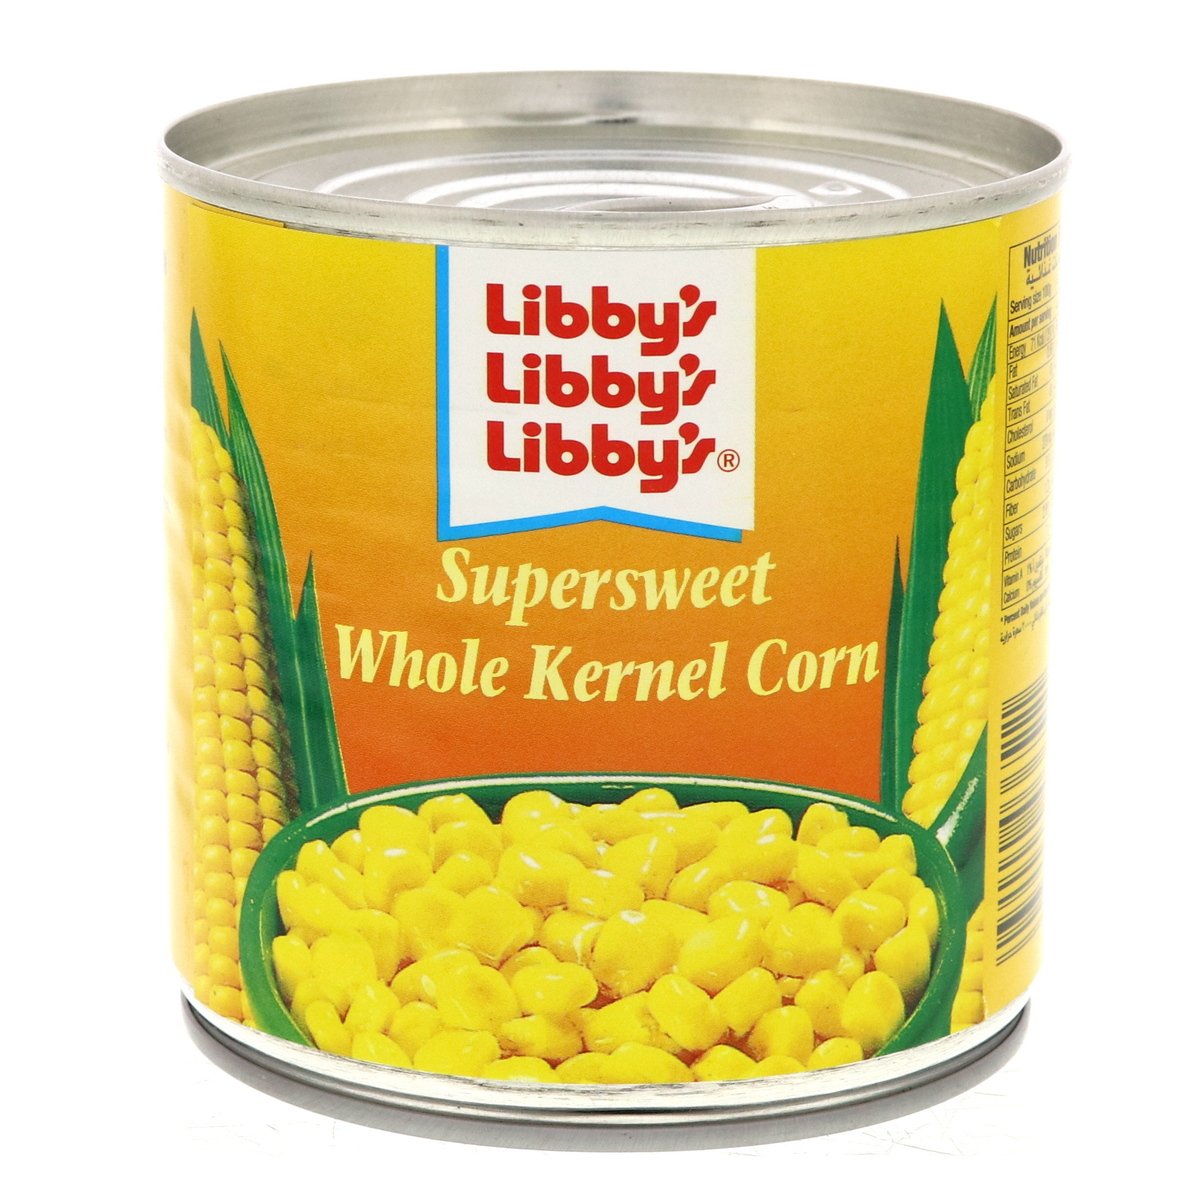 Libby's Supersweet Whole Kernel Corn 340 g